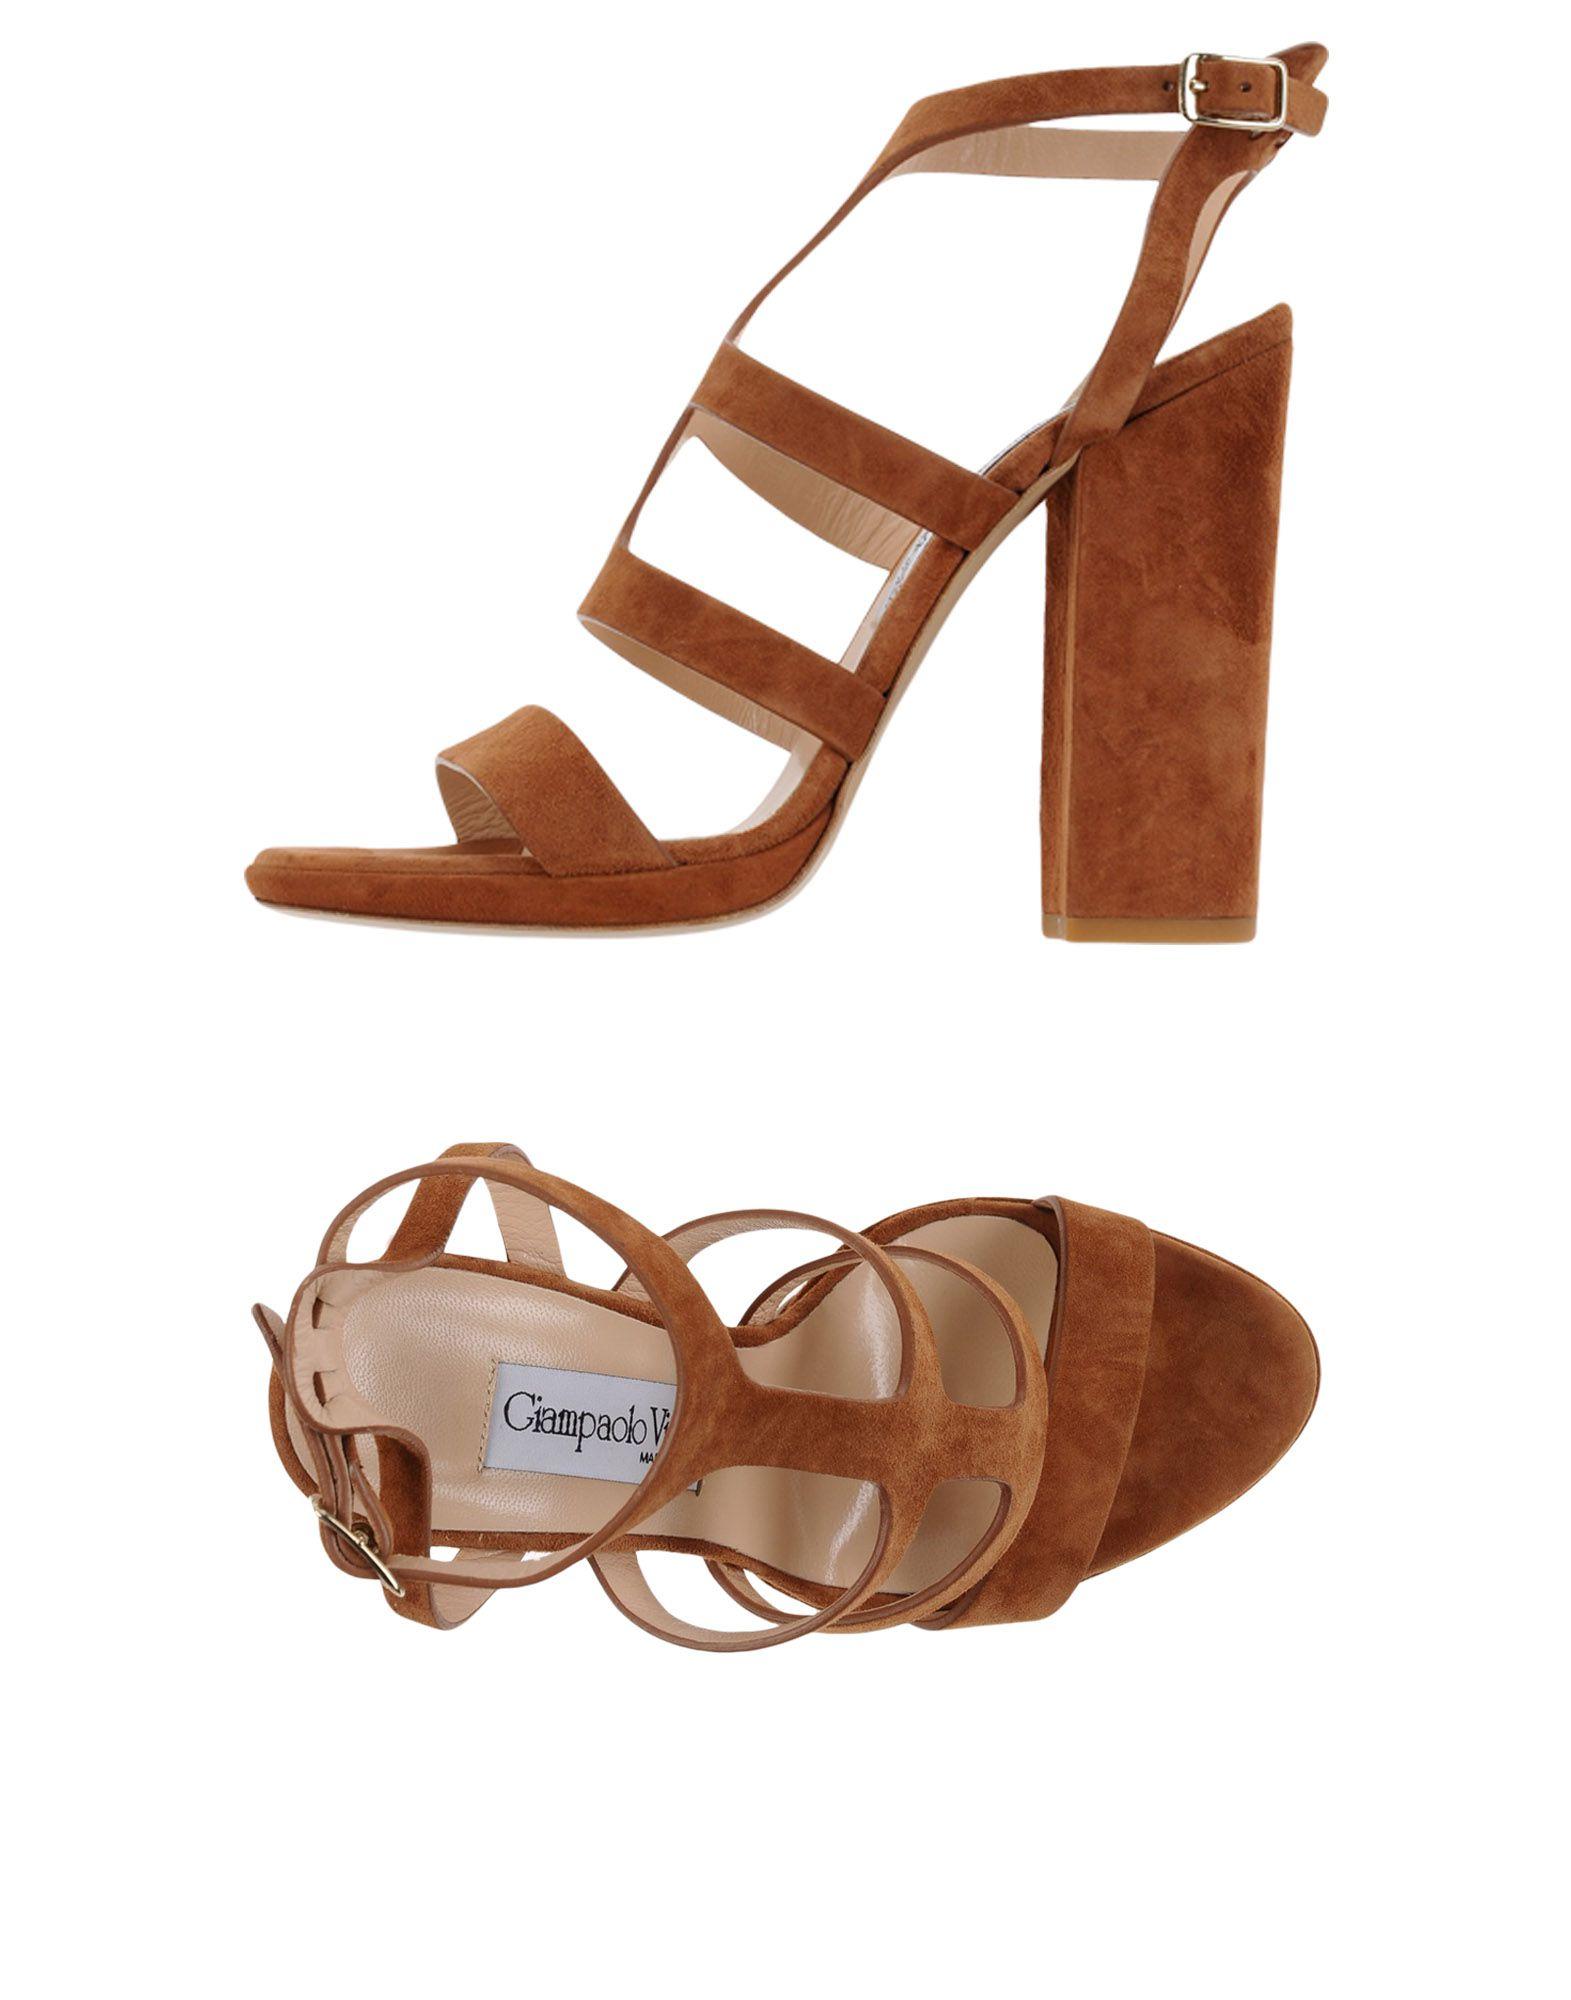 Lyst - Giampaolo Viozzi Sandals in Brown